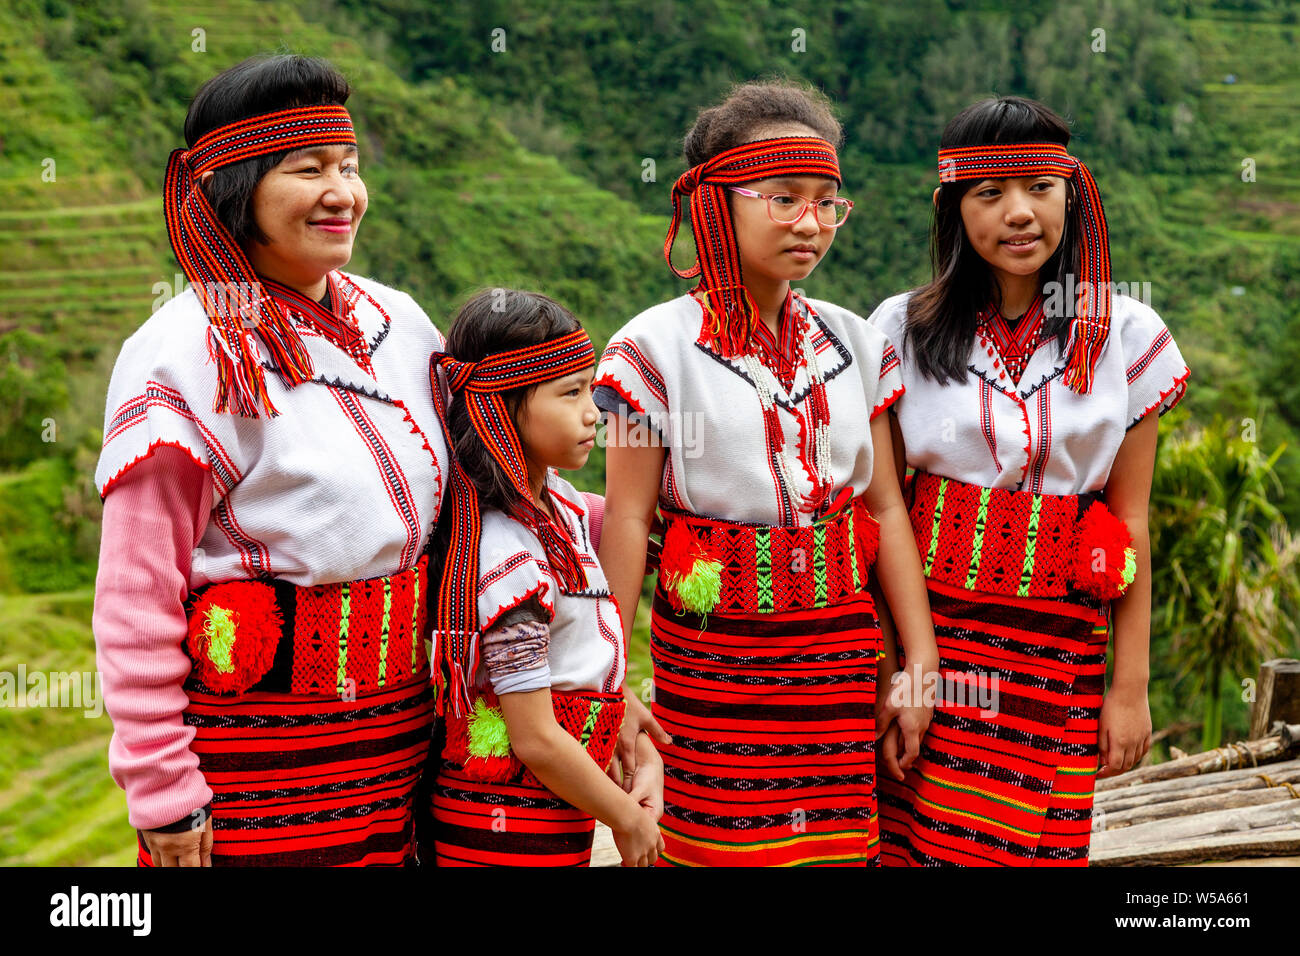 A Filipino Family Pose For Photos Wearing Traditional Ifugao Tribal Costumes, Banaue, Luzon, The Philippines Stock Photo